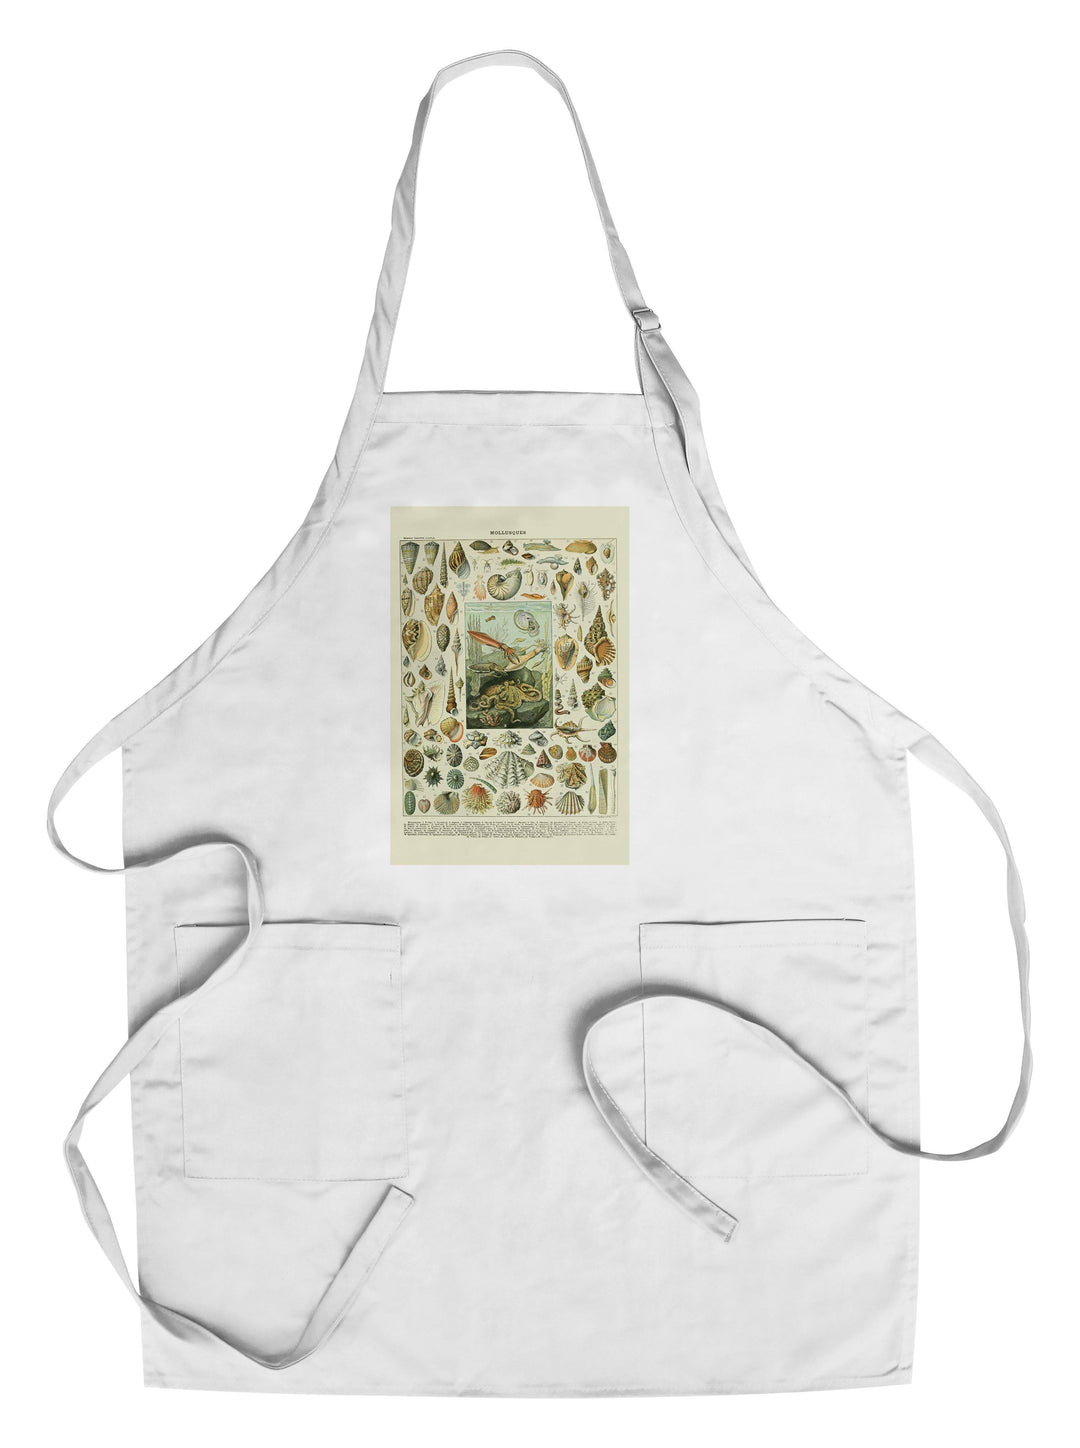 Assorted Shells, A, Vintage Bookplate, Adolphe Millot Artwork, Towels and Aprons Kitchen Lantern Press Chef's Apron 